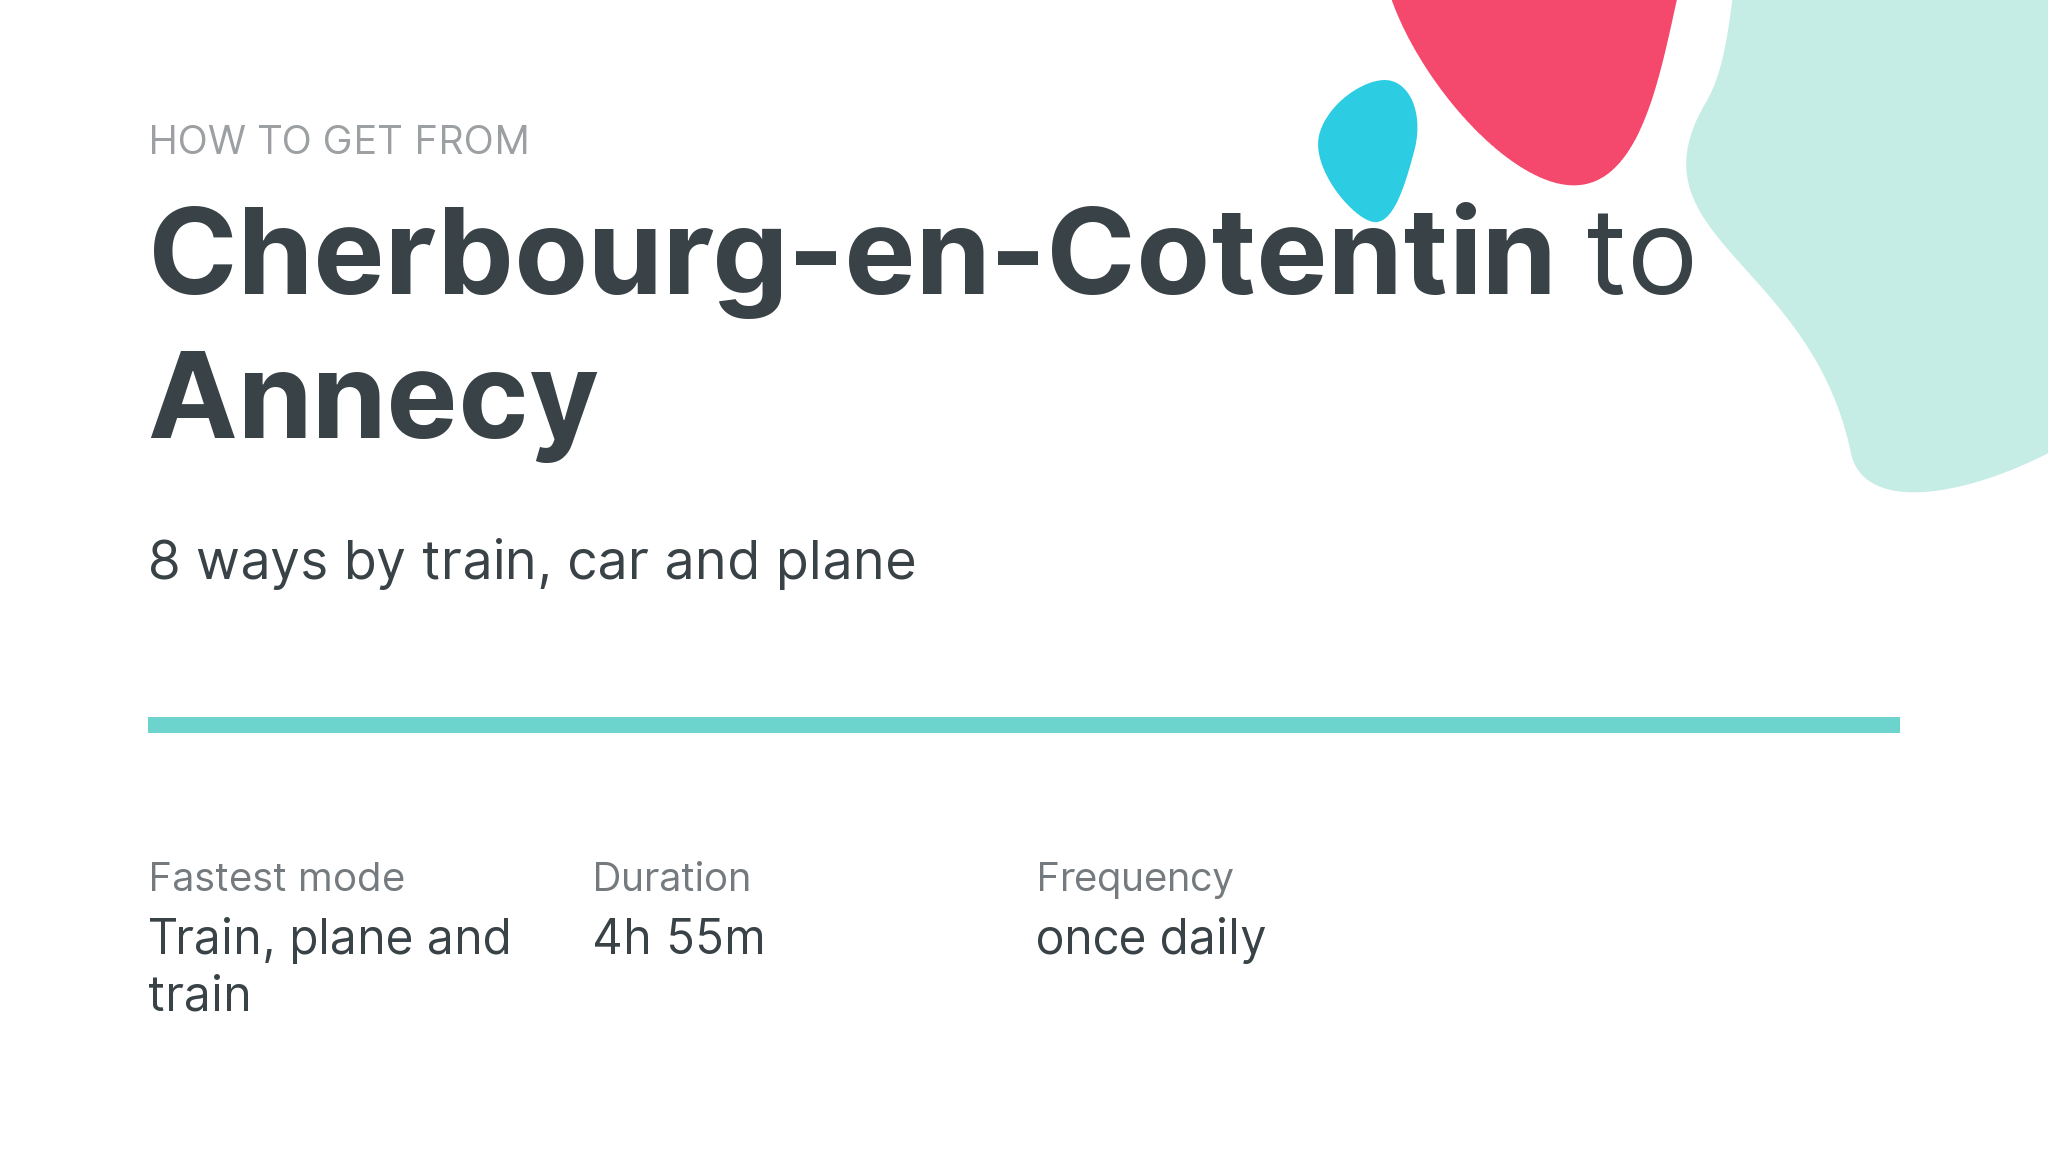 How do I get from Cherbourg-en-Cotentin to Annecy